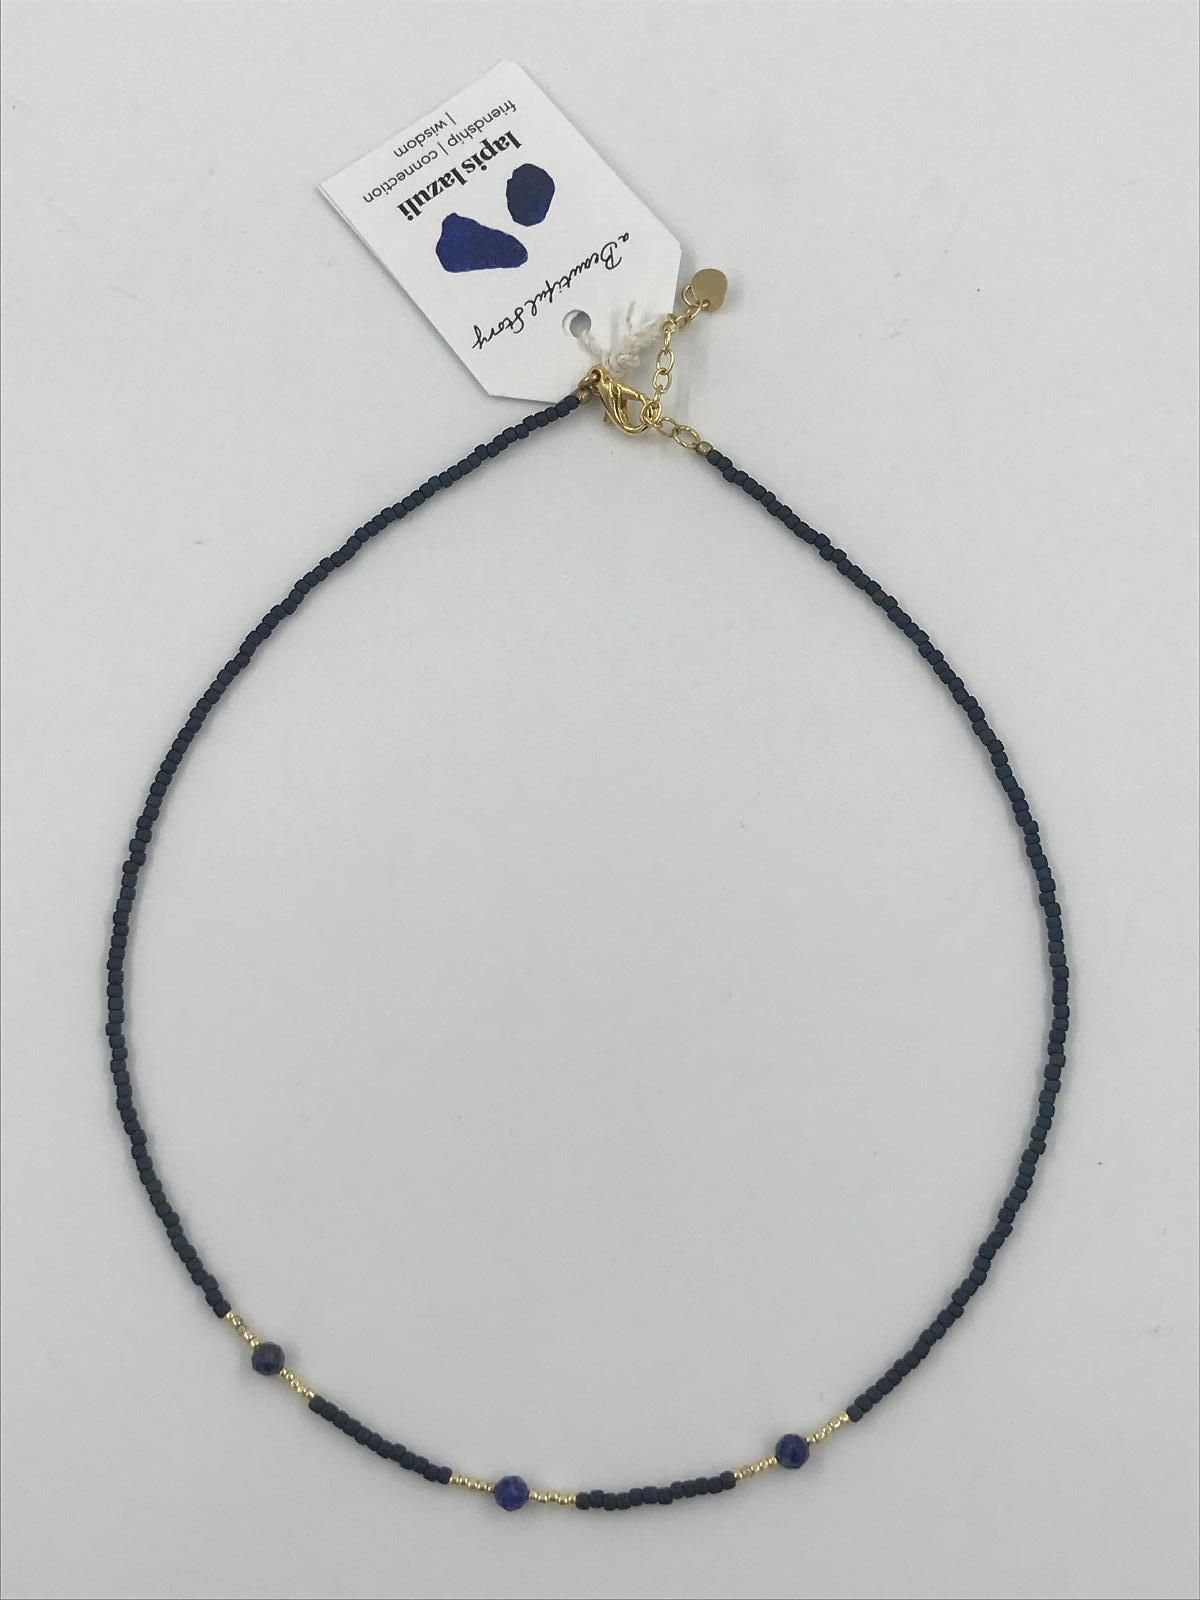 aBStory brightly lapis lazuli necklace G (BL23306 brightly lapis lazuli necklace G) - Stiletto Schoenen (Oudenaarde)